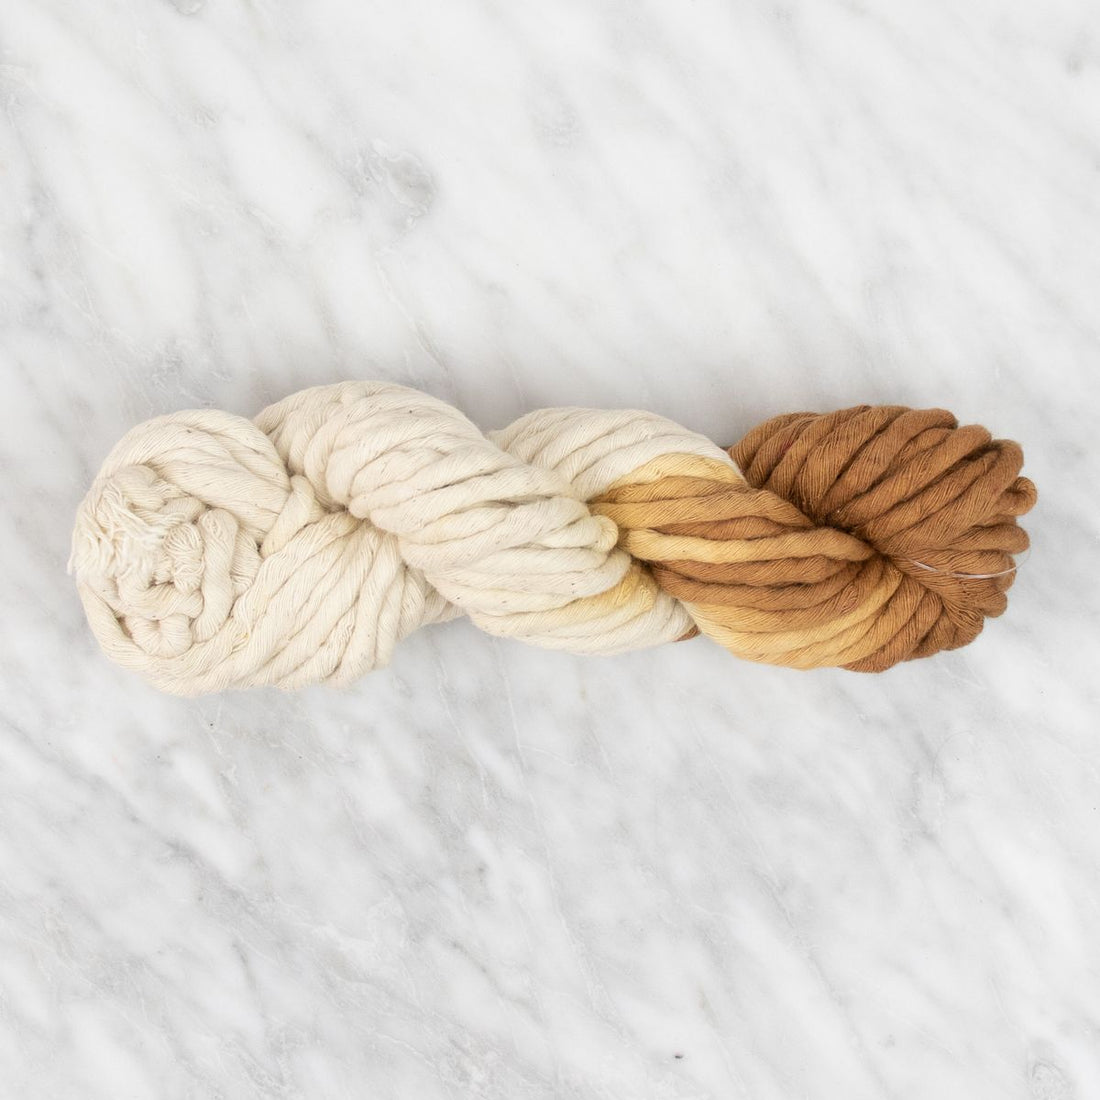 5mm Dip-Dyed Cotton String - Antique Gold - 100 grams